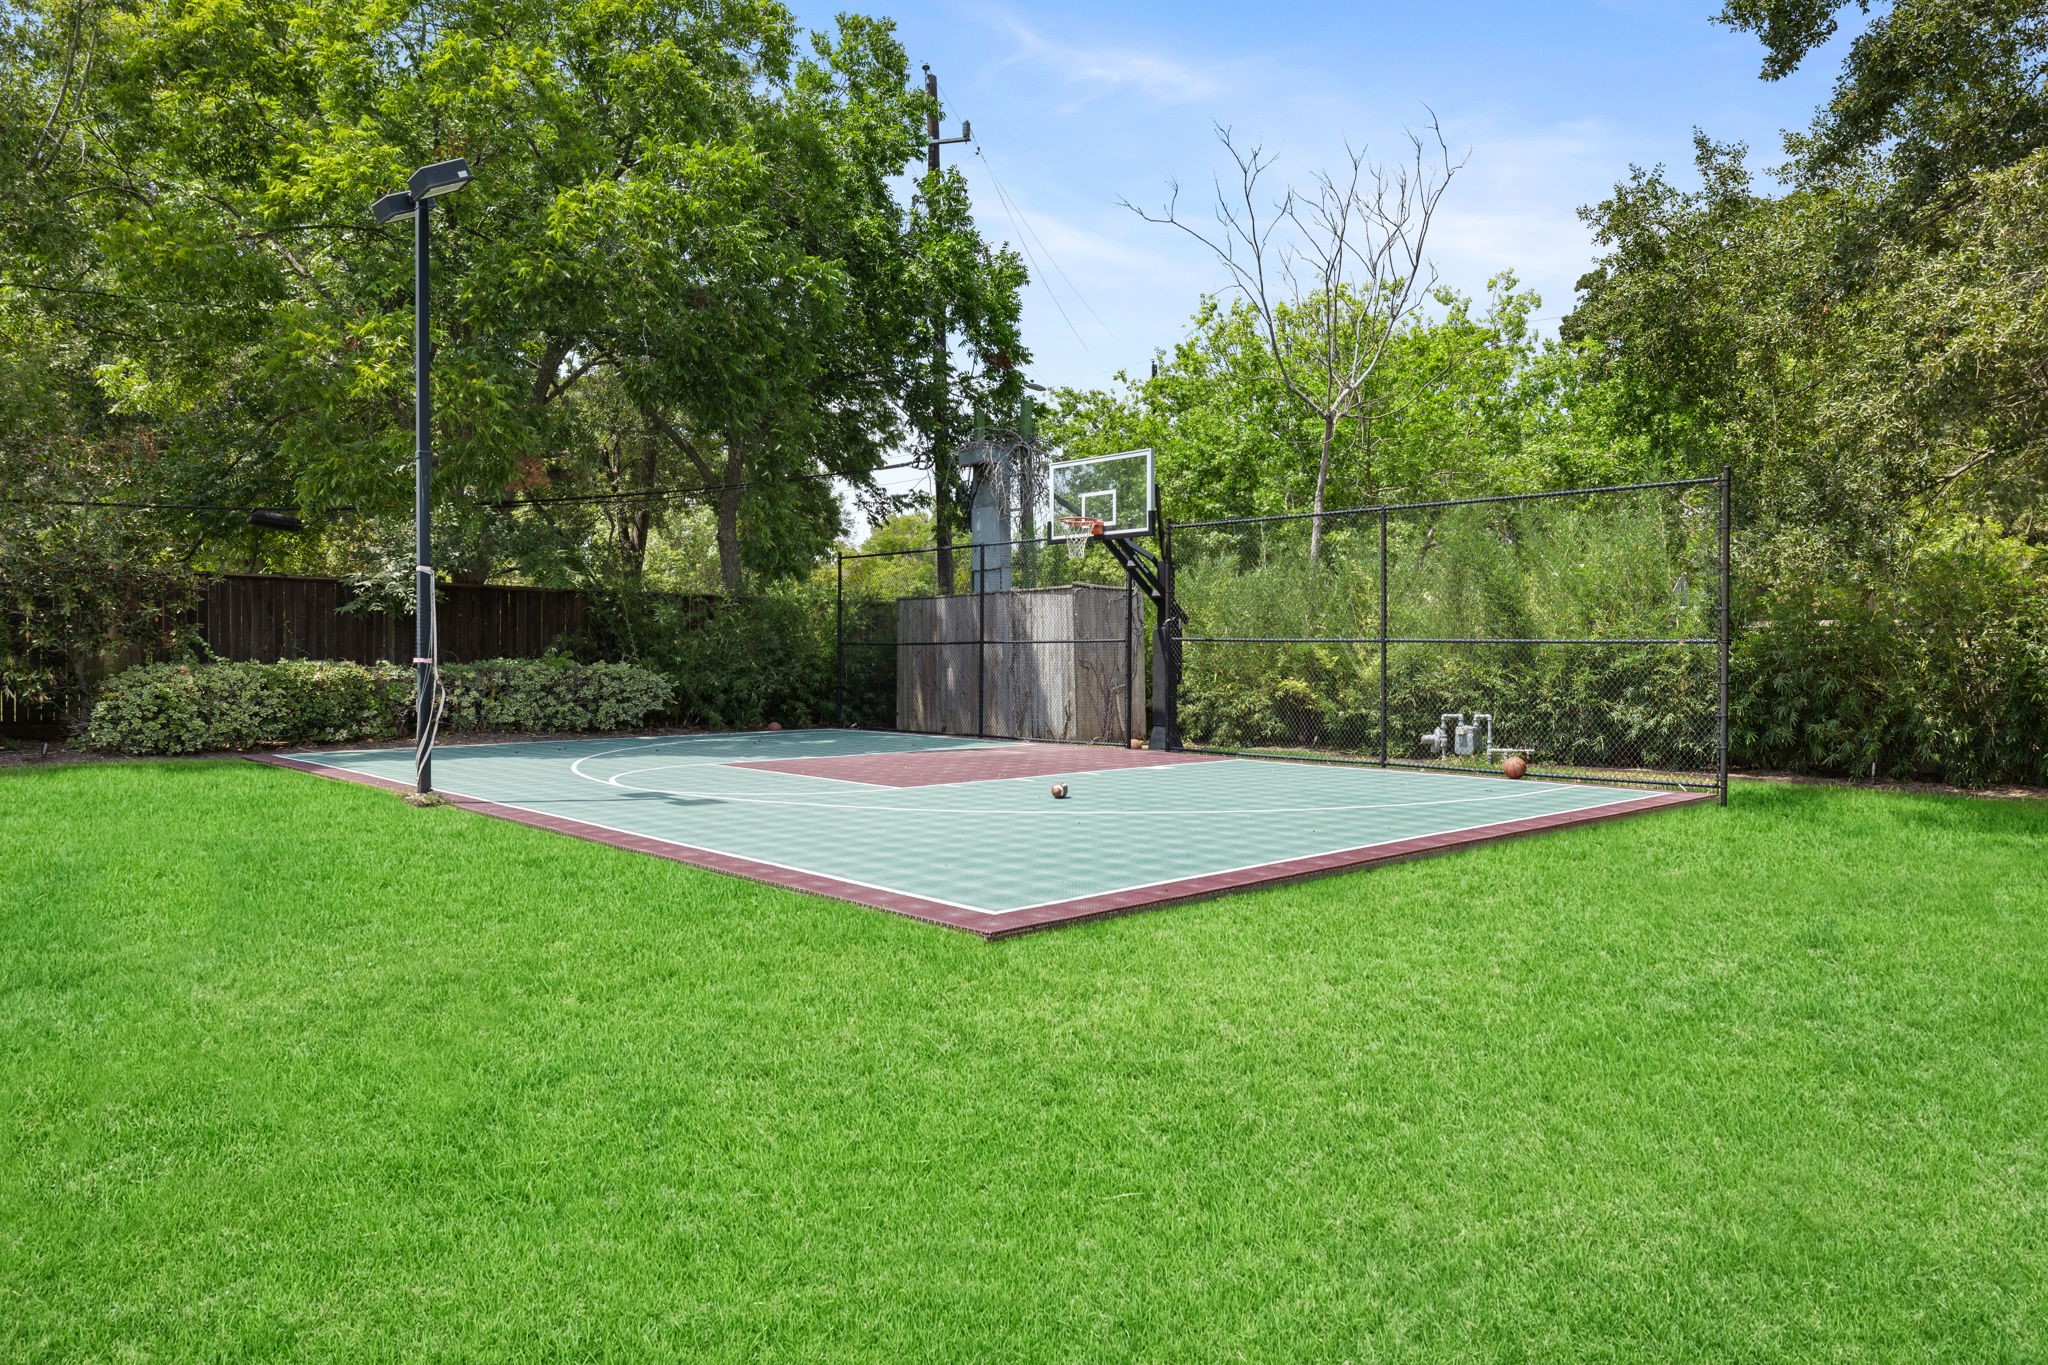 The lighted Sports Court is tucked away on the northwest corner of the Estate. Practice your Golf or Tennis swing, smack the Tetherball around the pole, put together a pick up game of Basketball, or be all the rage and convert the Sports Court to a Pickleball Court!